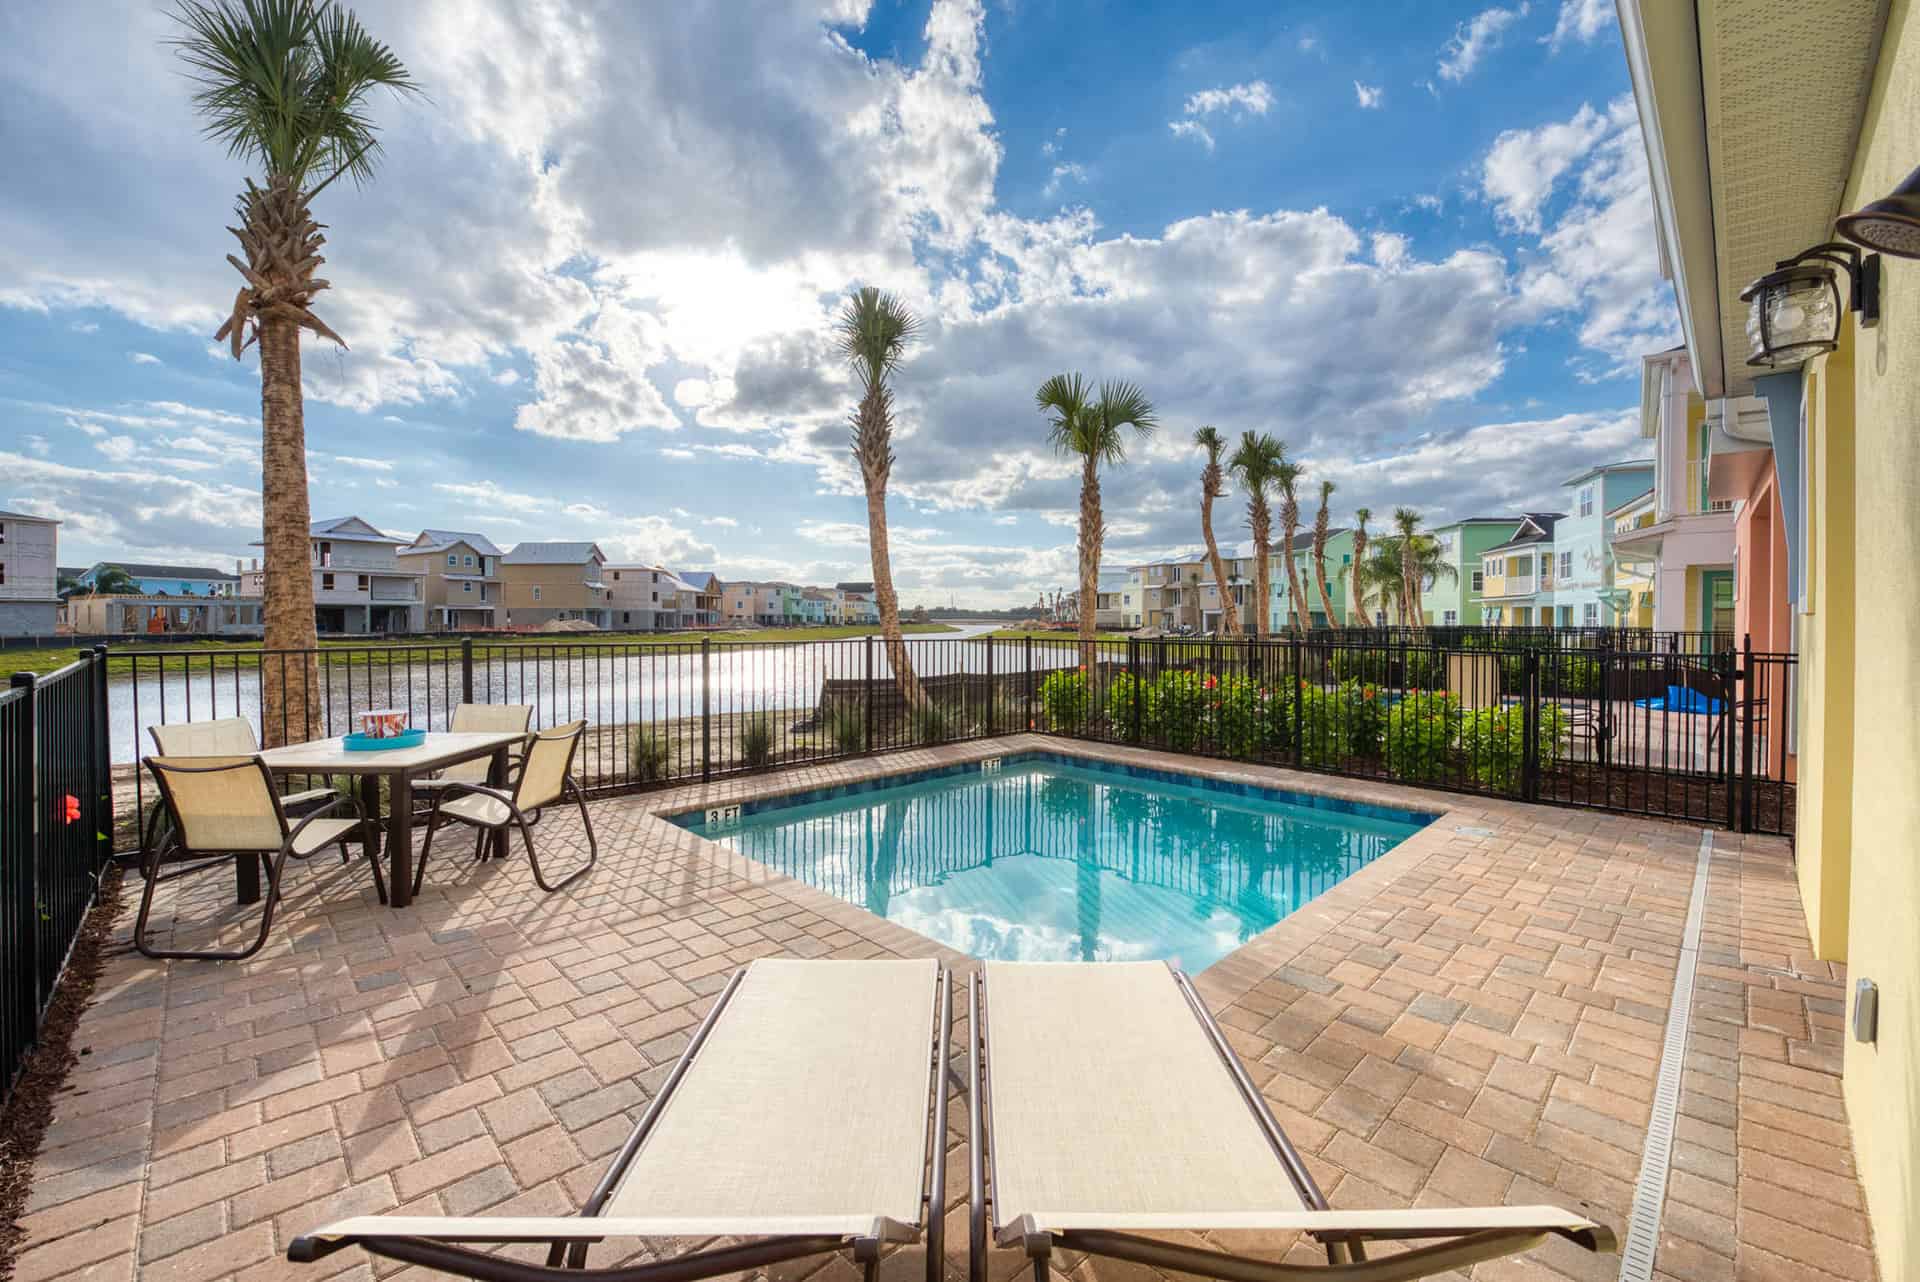 Private cottage with lake view pool at Margaritaville Resort Orlando.